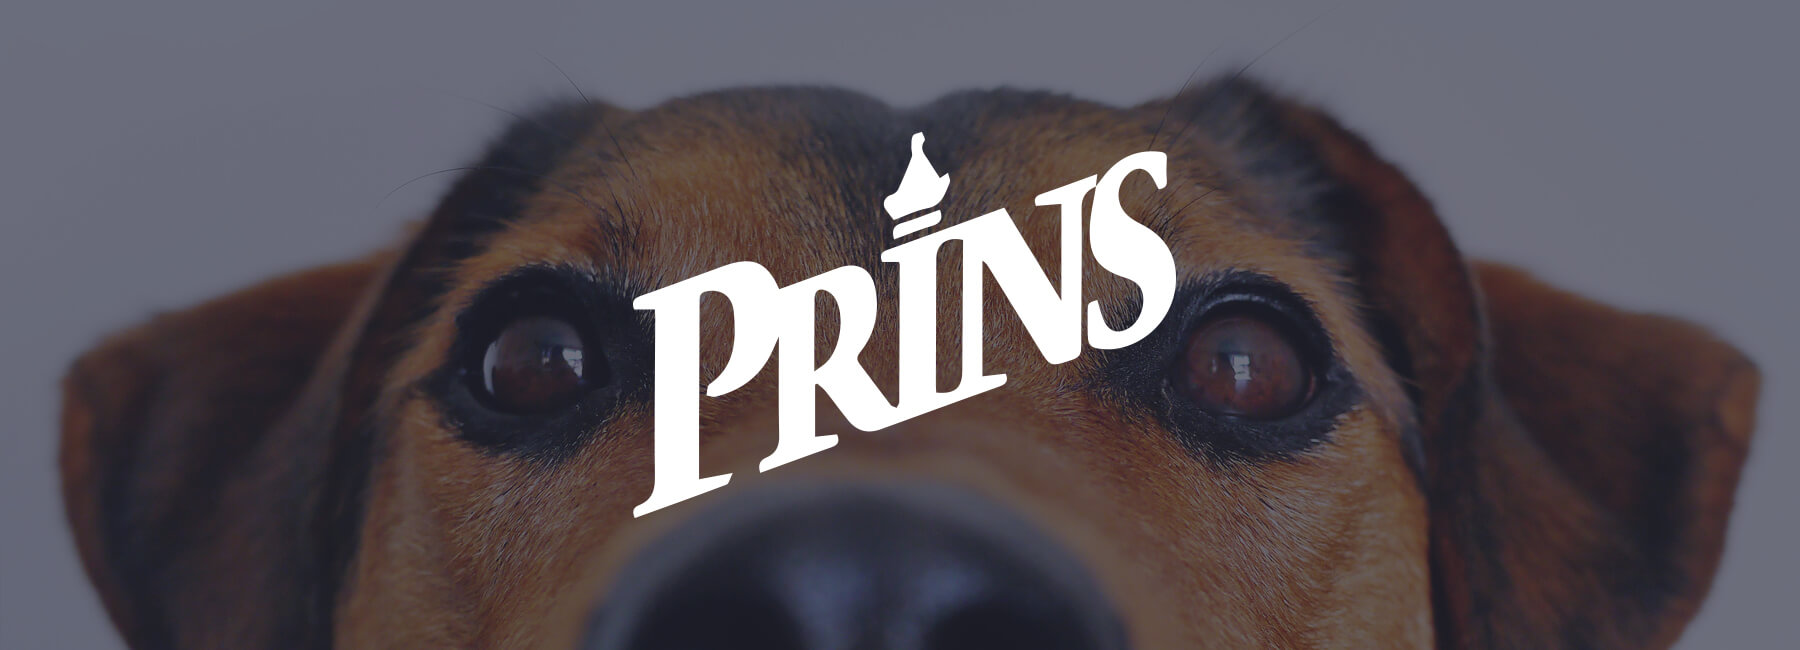 Prins Petfoods improves online customer journey with Mopinion